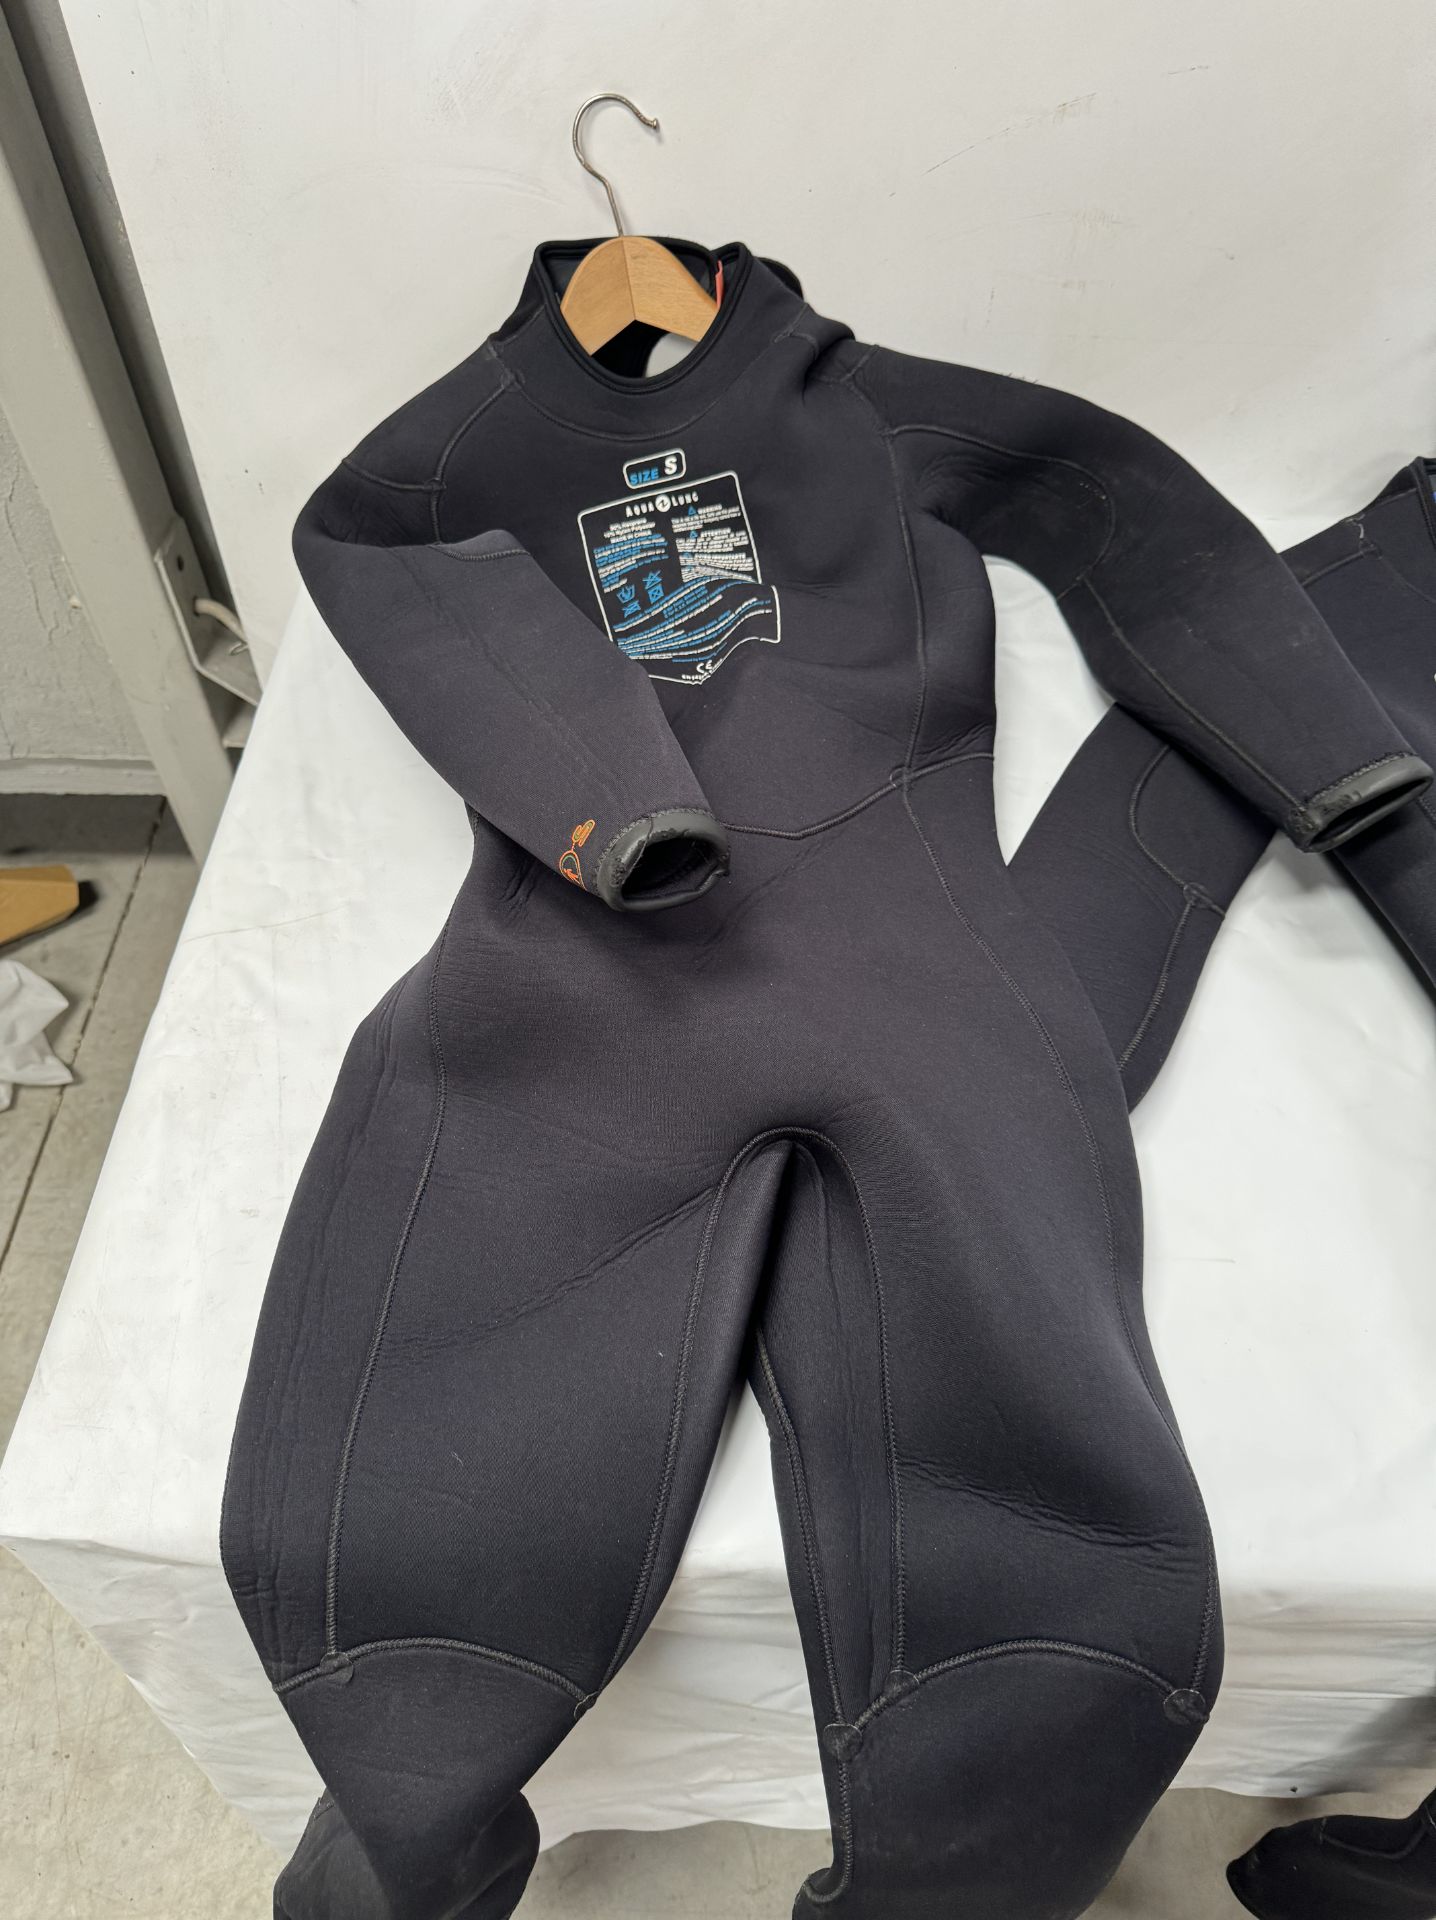 Three Aqualung Wetsuits, Size S (Location: Brentwood. Please Refer to General Notes) - Image 2 of 7